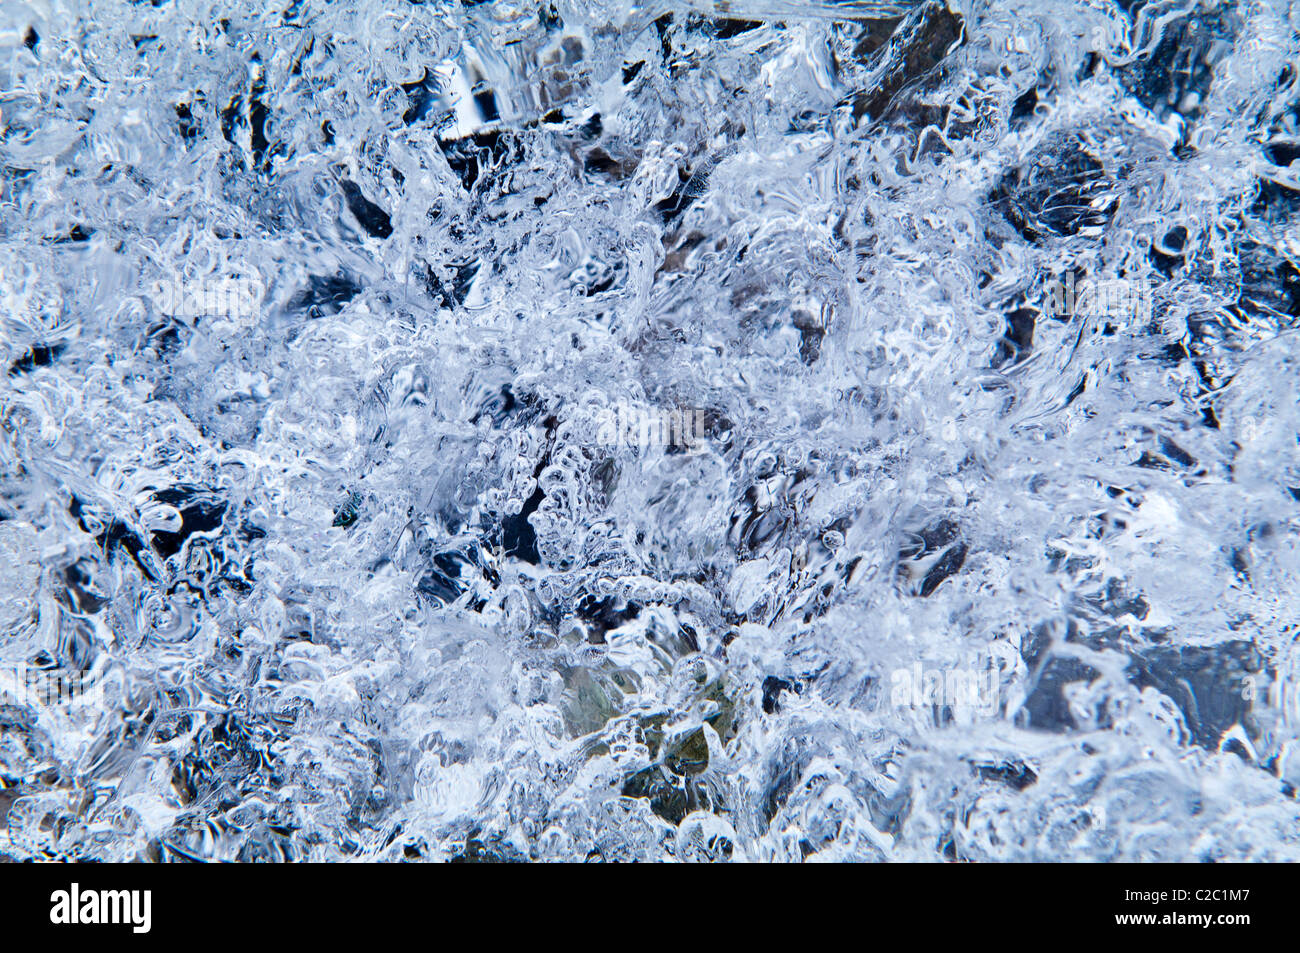 Mosaic patterns of air bubbles trapped in a block of transparent ice. Stock Photo